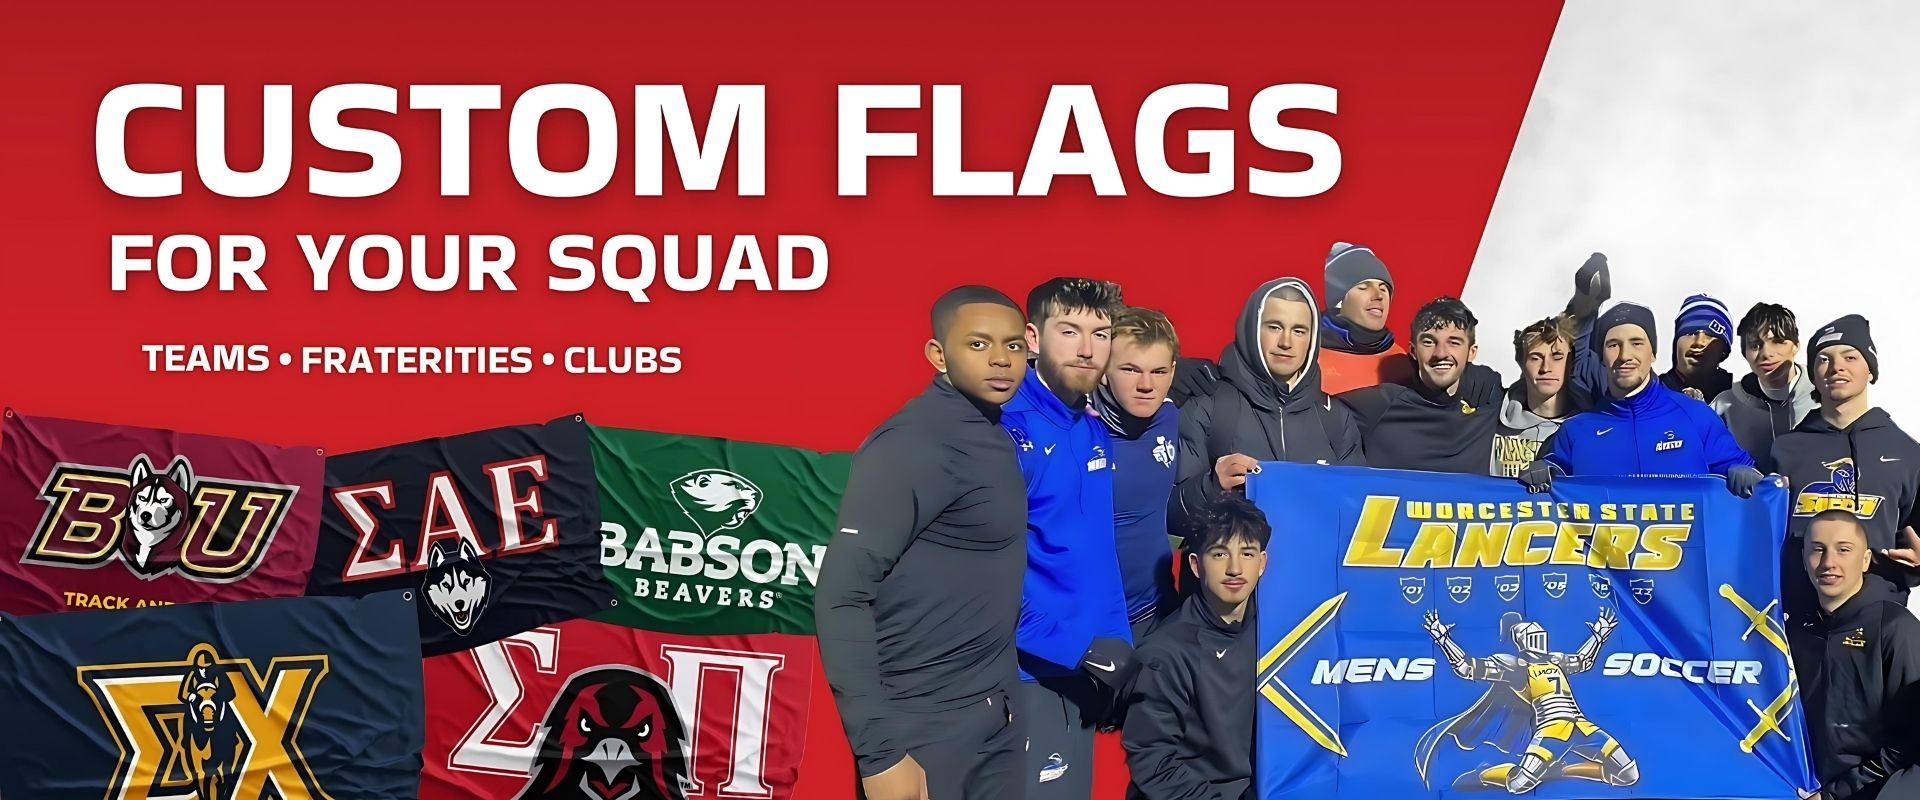 Custom flags displayed by diverse college sports teams and groups, with 'CUSTOM FLAGS FOR YOUR SQUAD' text for teams, fraternities, and clubs, showcasing Flagaholics' personalized flags for universities and organizations